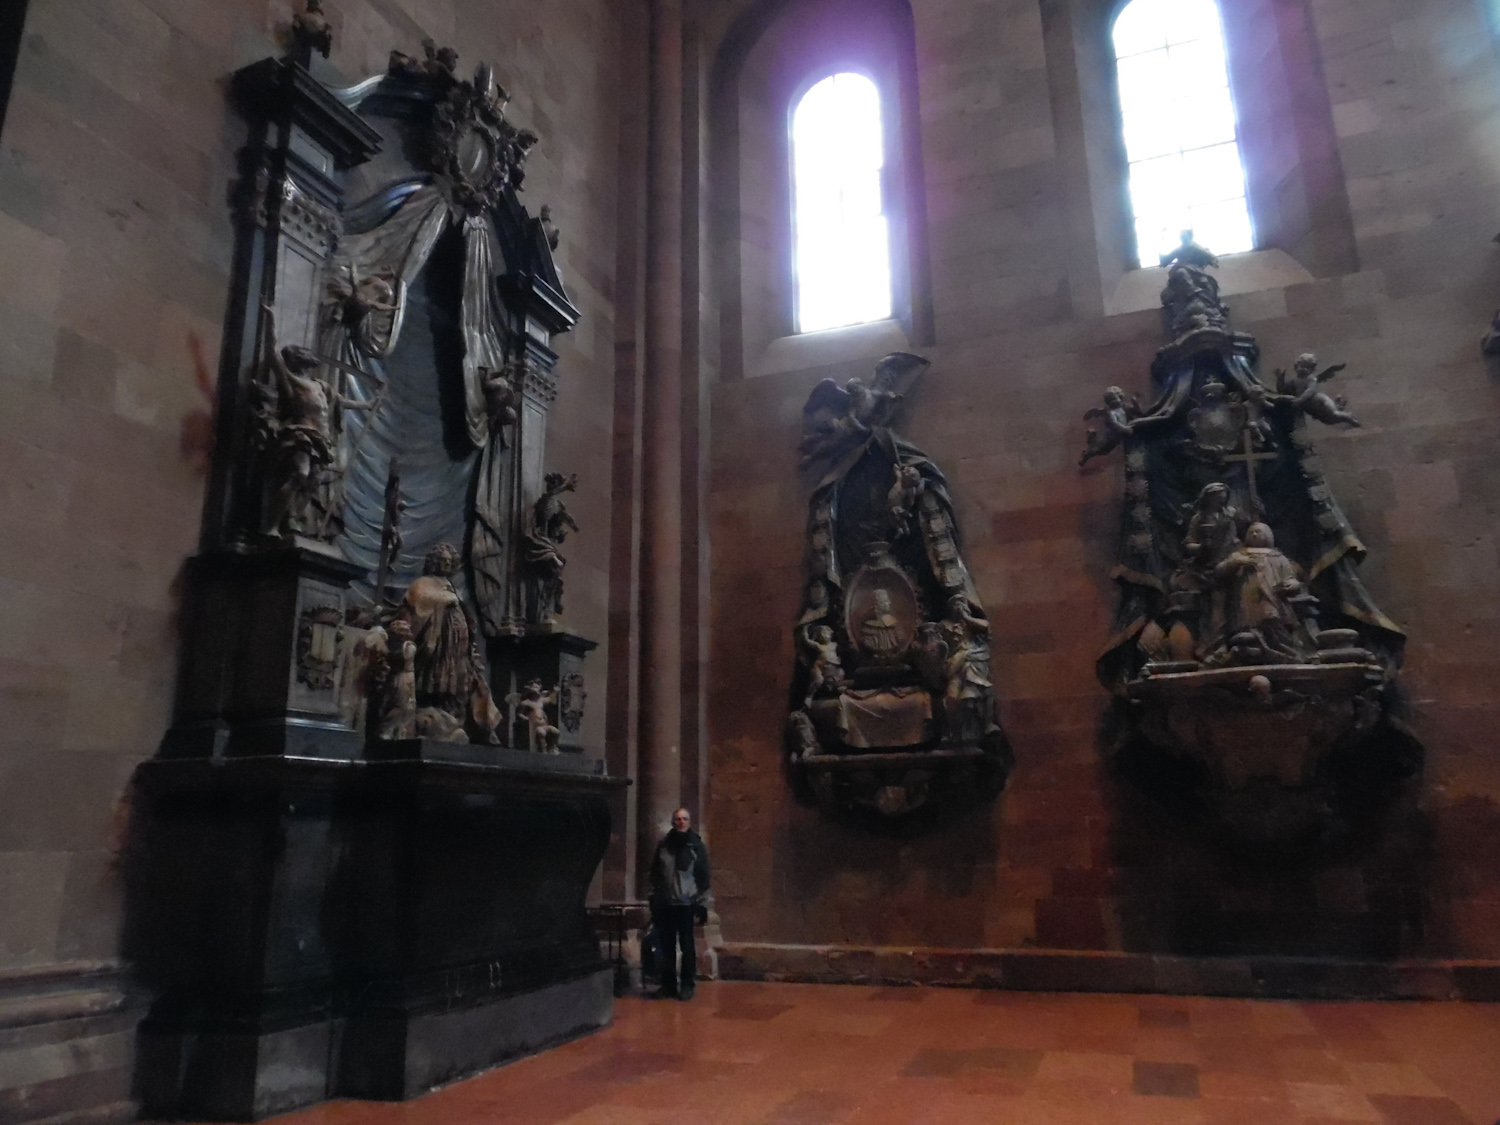 Inside the 10th century Mainz Cathedral